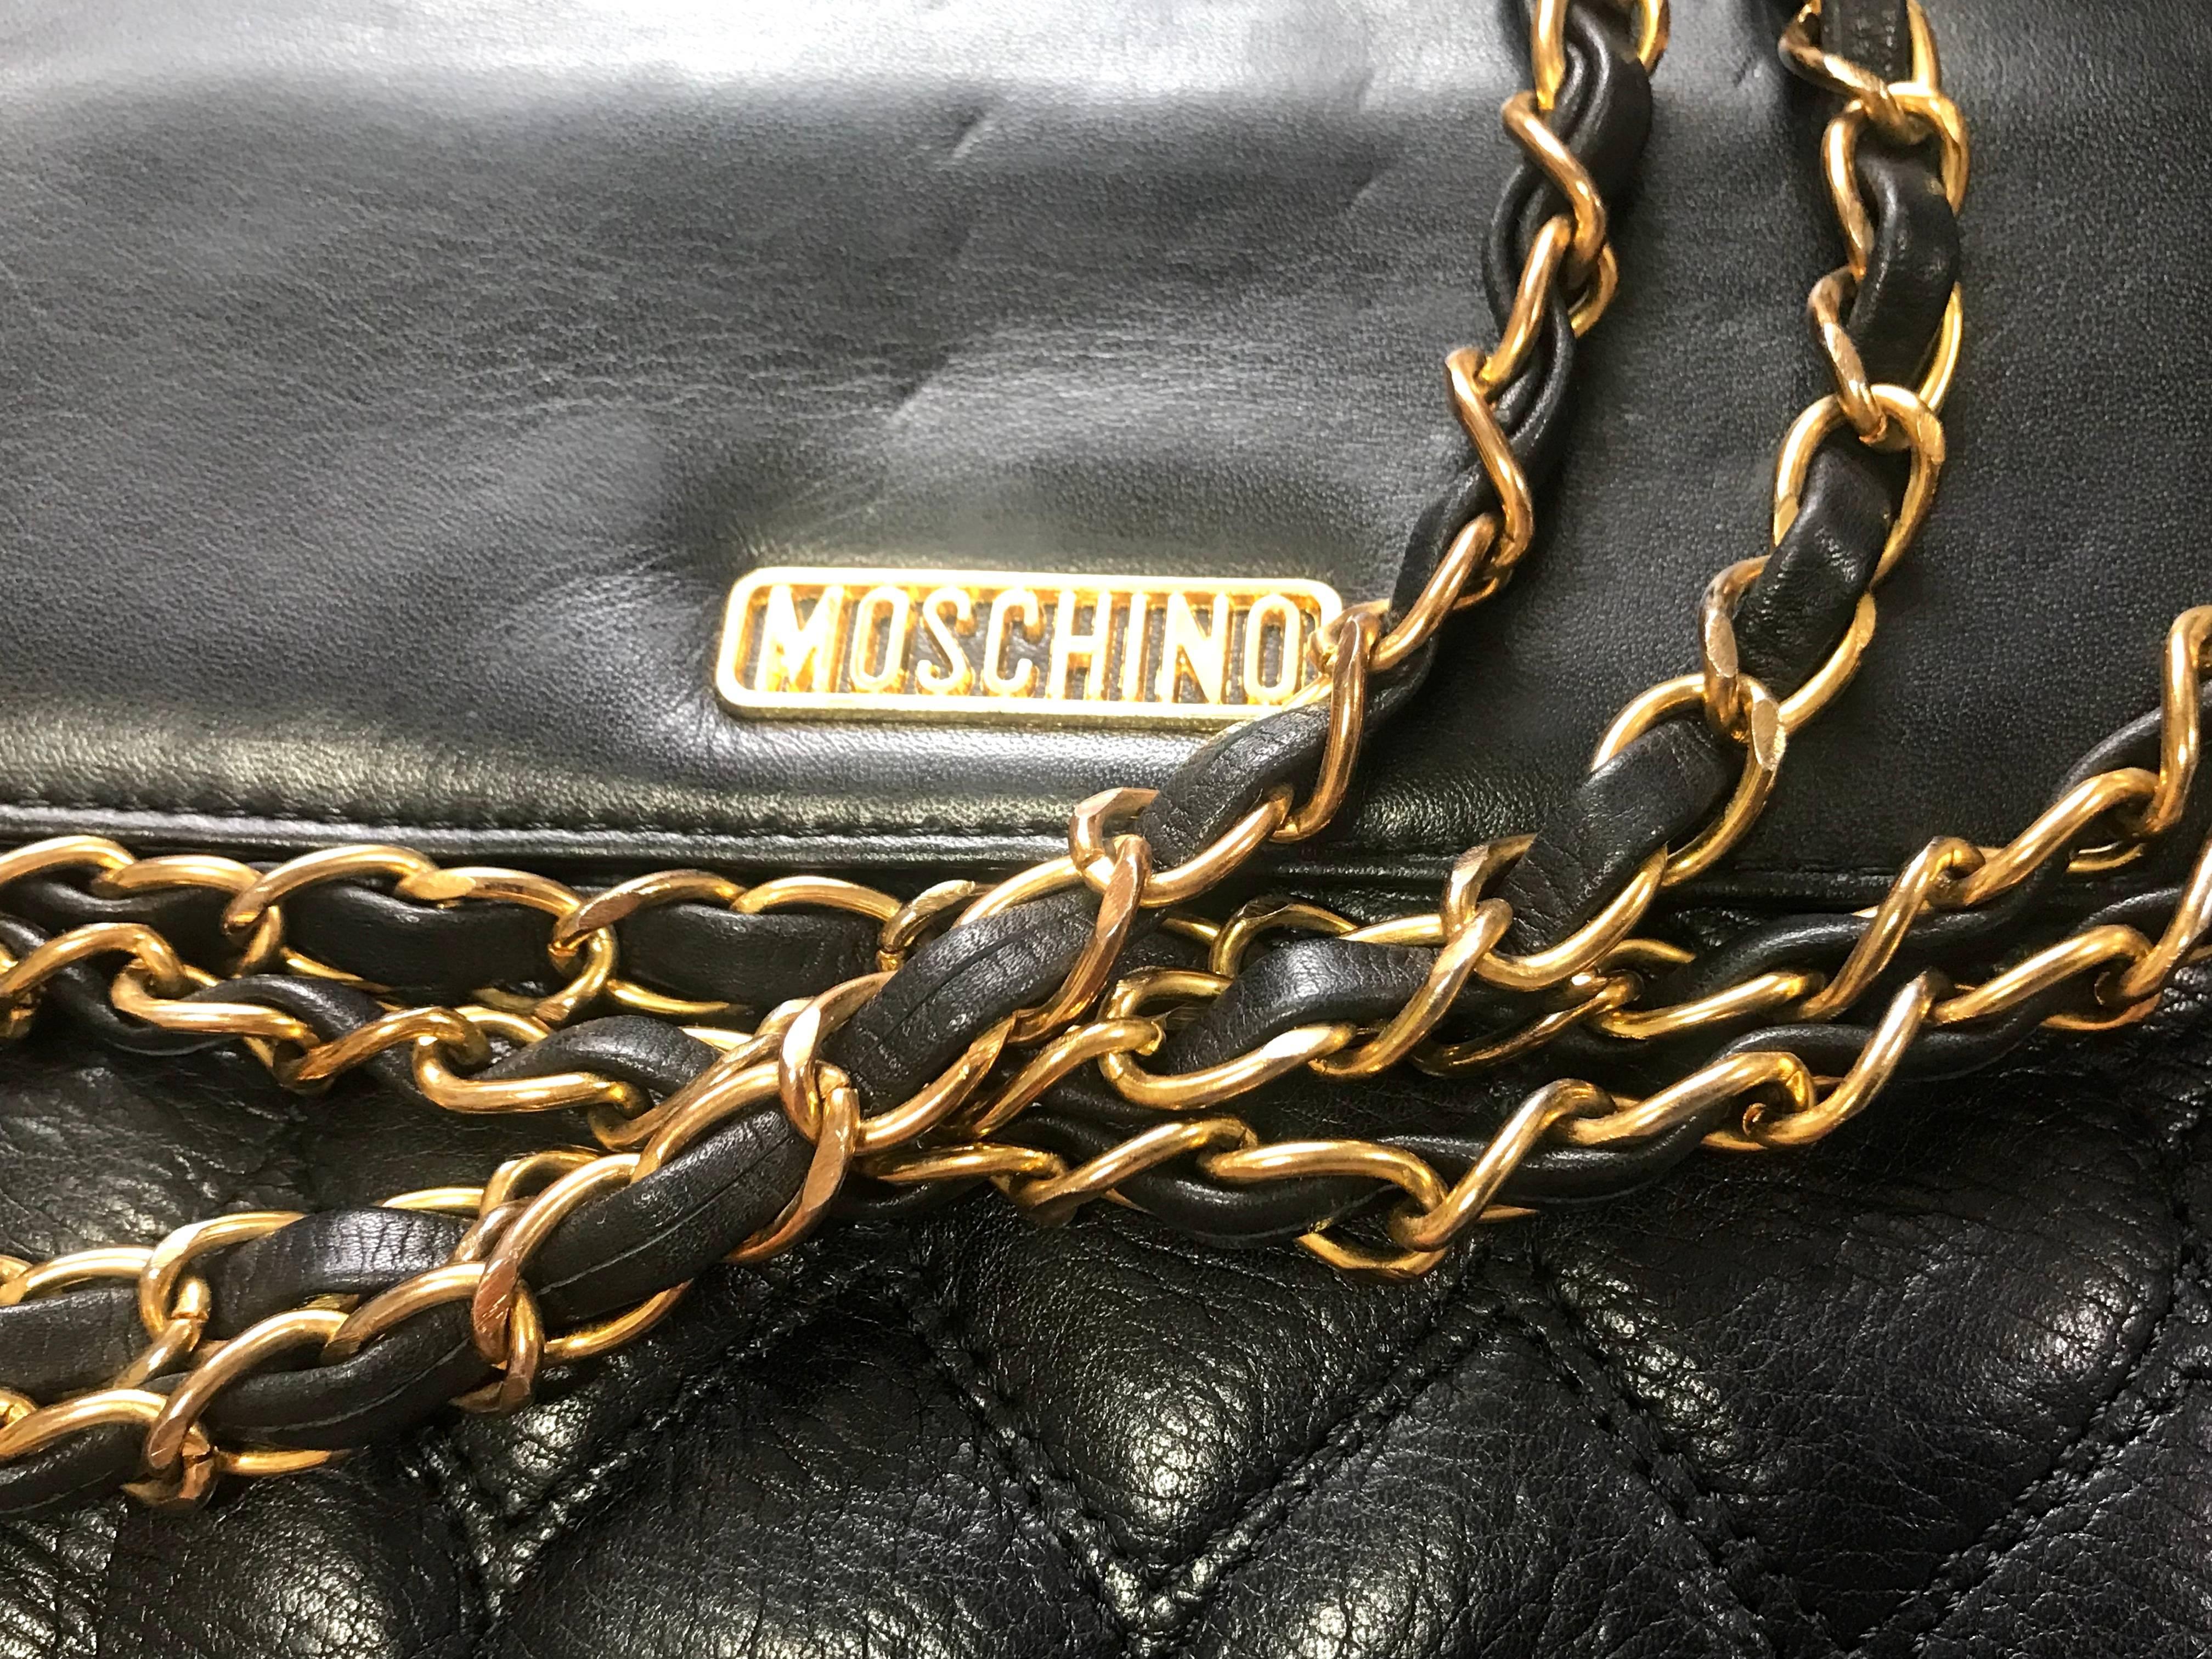 Black Vintage MOSCHINO black heart shape stitch shoulder bag, fanny pack with chains.